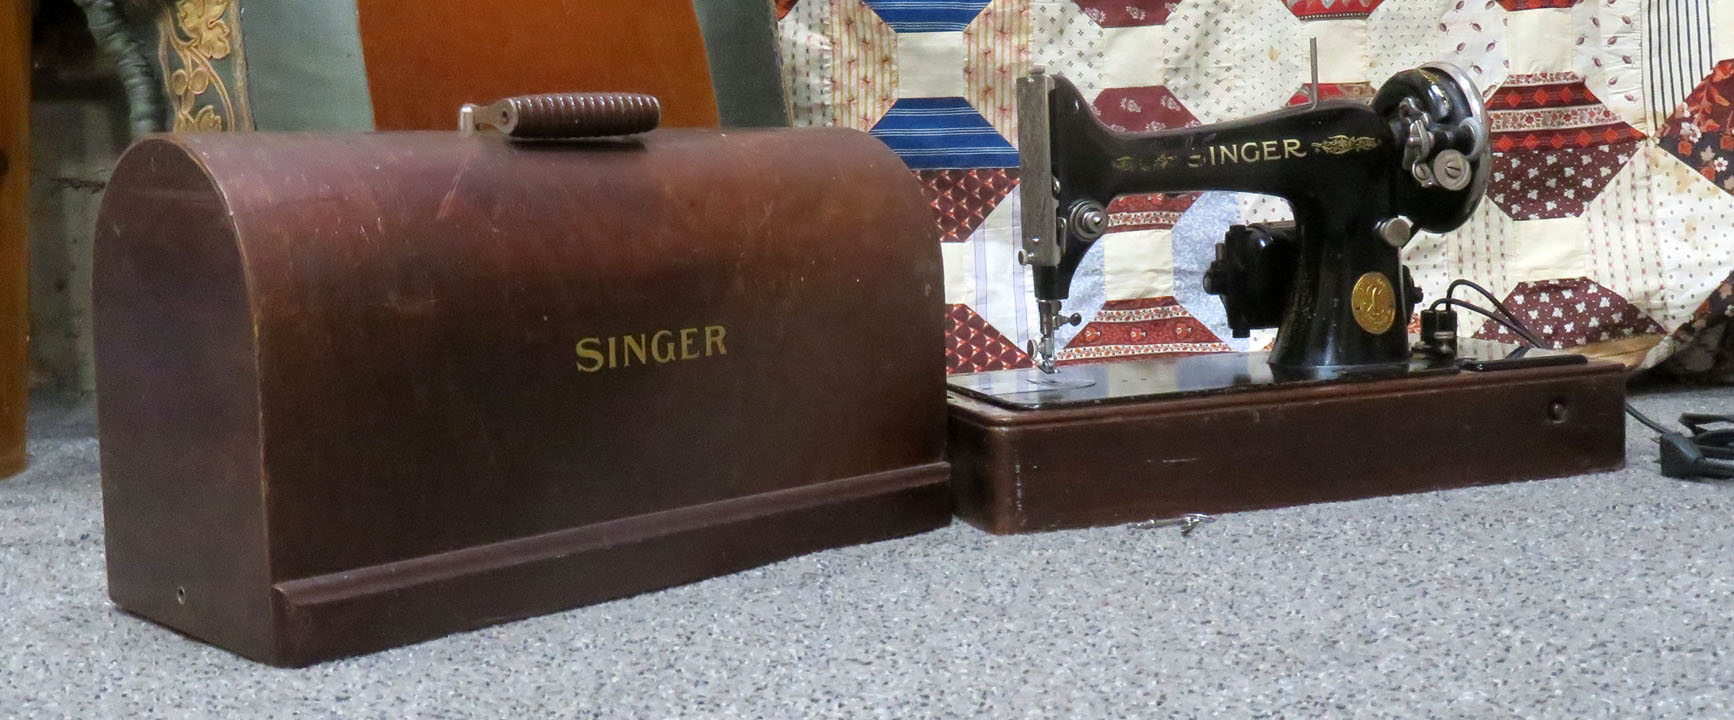 SINGER: Singer Featherweight Electric Sewing Machine